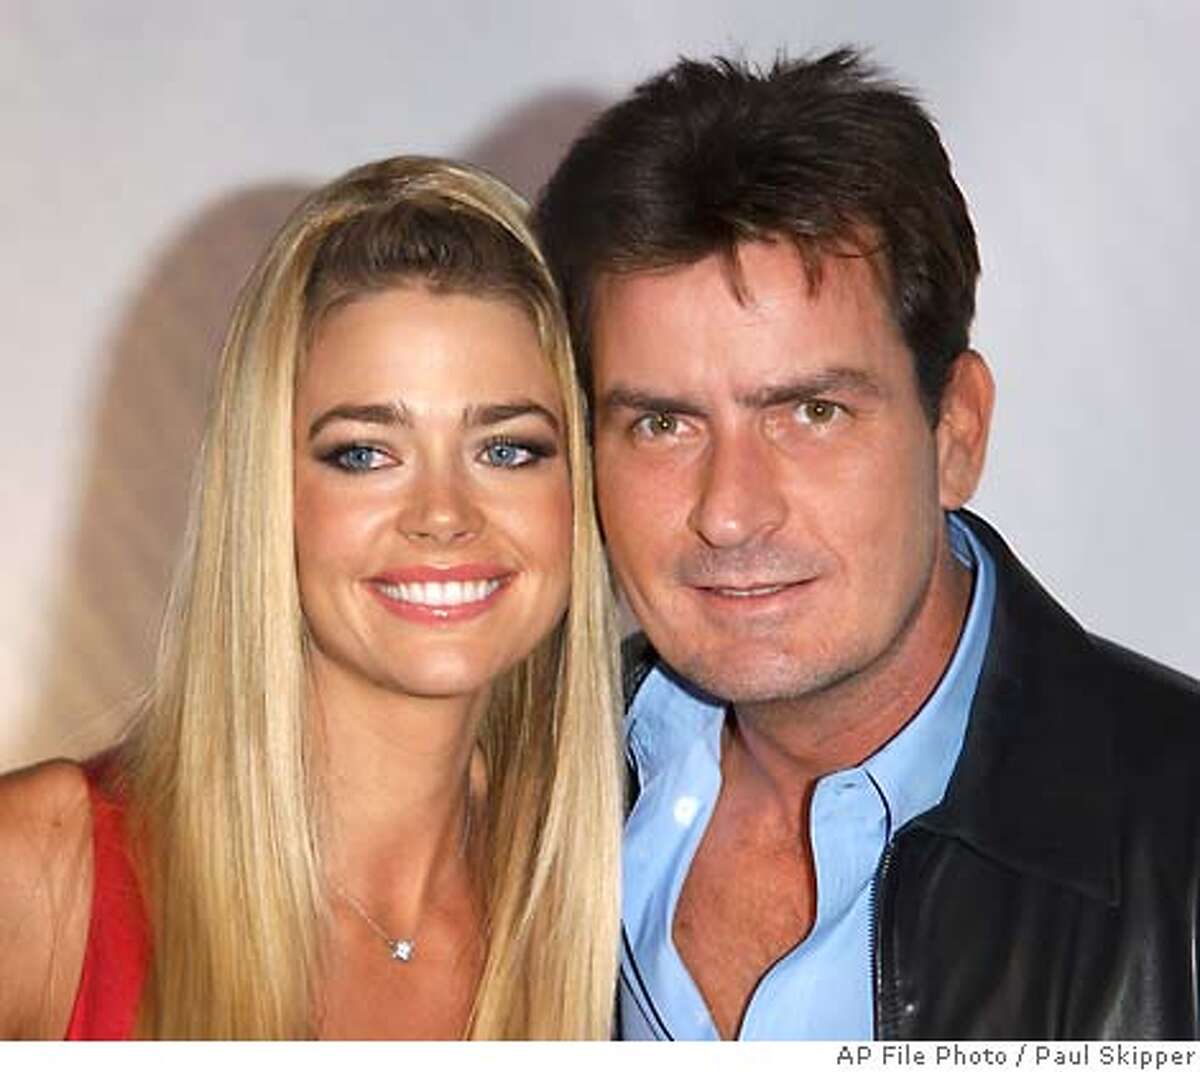 ** FILE ** Denise Richards and husband Charlie Sheen are shown at the "Rodeo Drive Walk Of Style" in this Sept. 9, 2003 file photo, in Beverly Hills, Calif. (AP Photo/Paul Skipper, File)